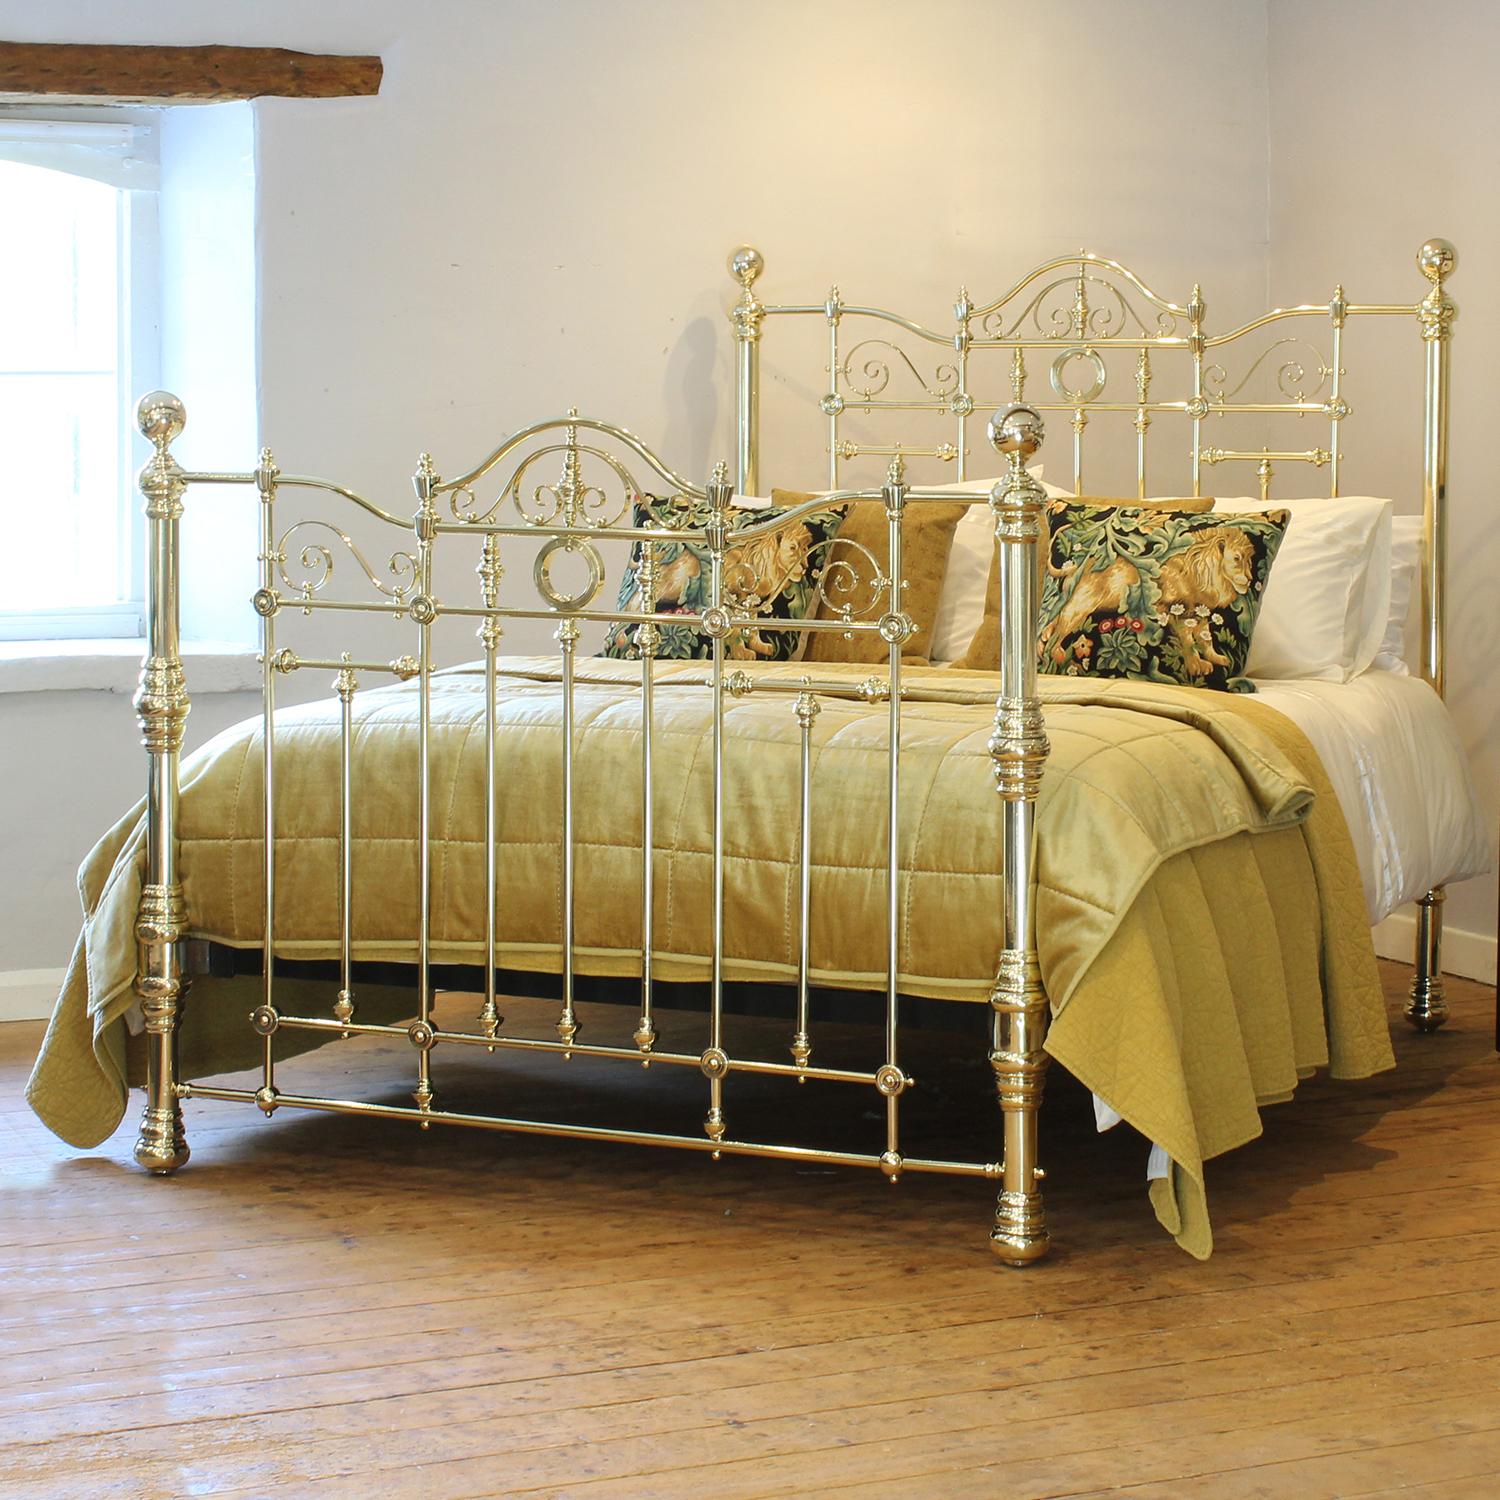 A superb top quality all brass Victorian antique bed with matching decorative gallery in head and foot panels, which feature scrolls, ornate cast fittings, trumpets and rings. This bed has the traditional round brass knobs fitted to the tops of